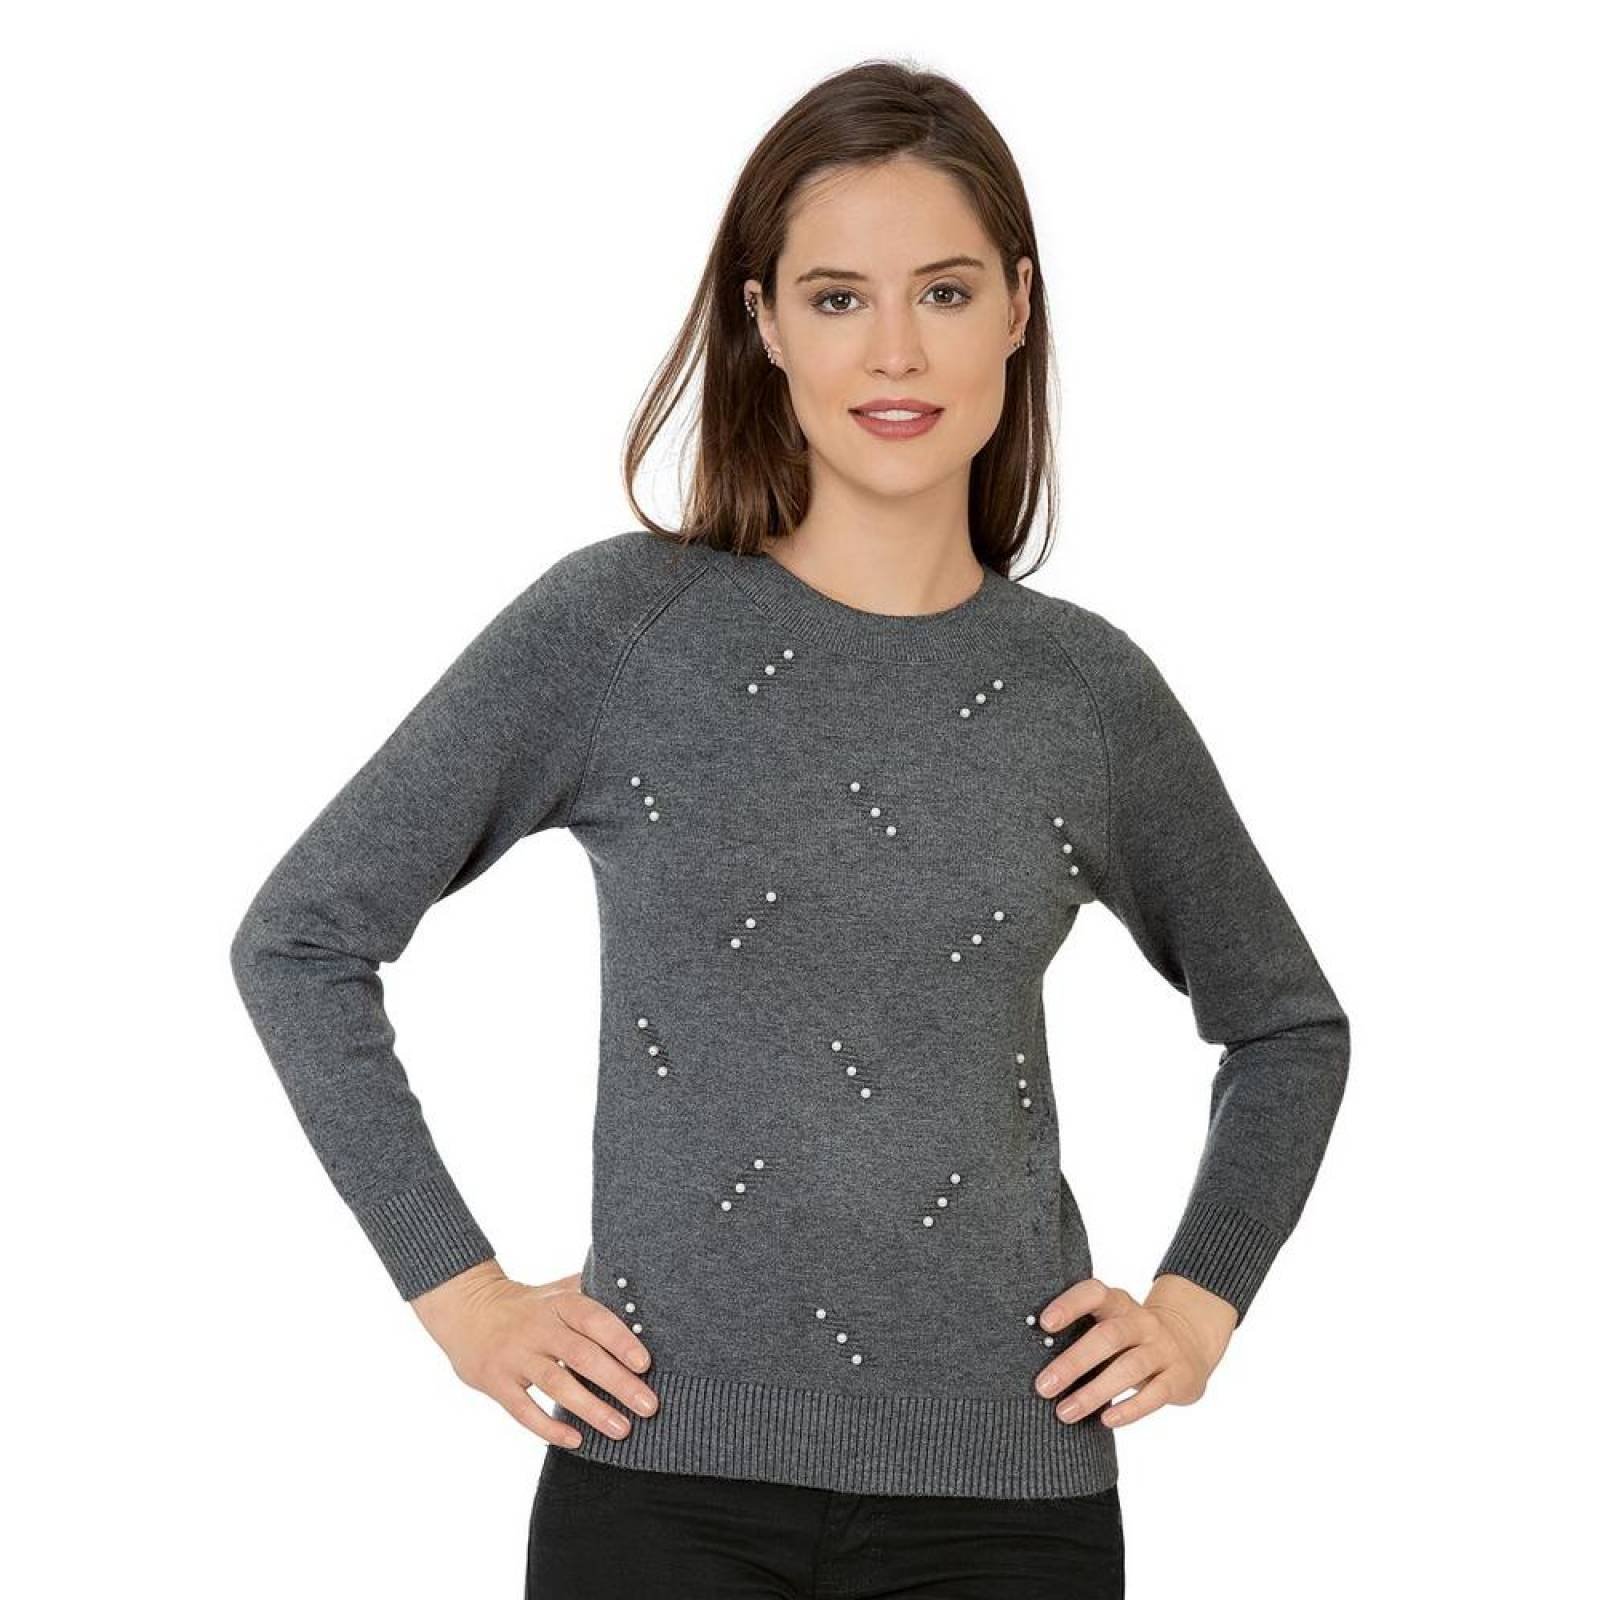 Sweater Capricho Mujer Gris Spandex Cns-121 